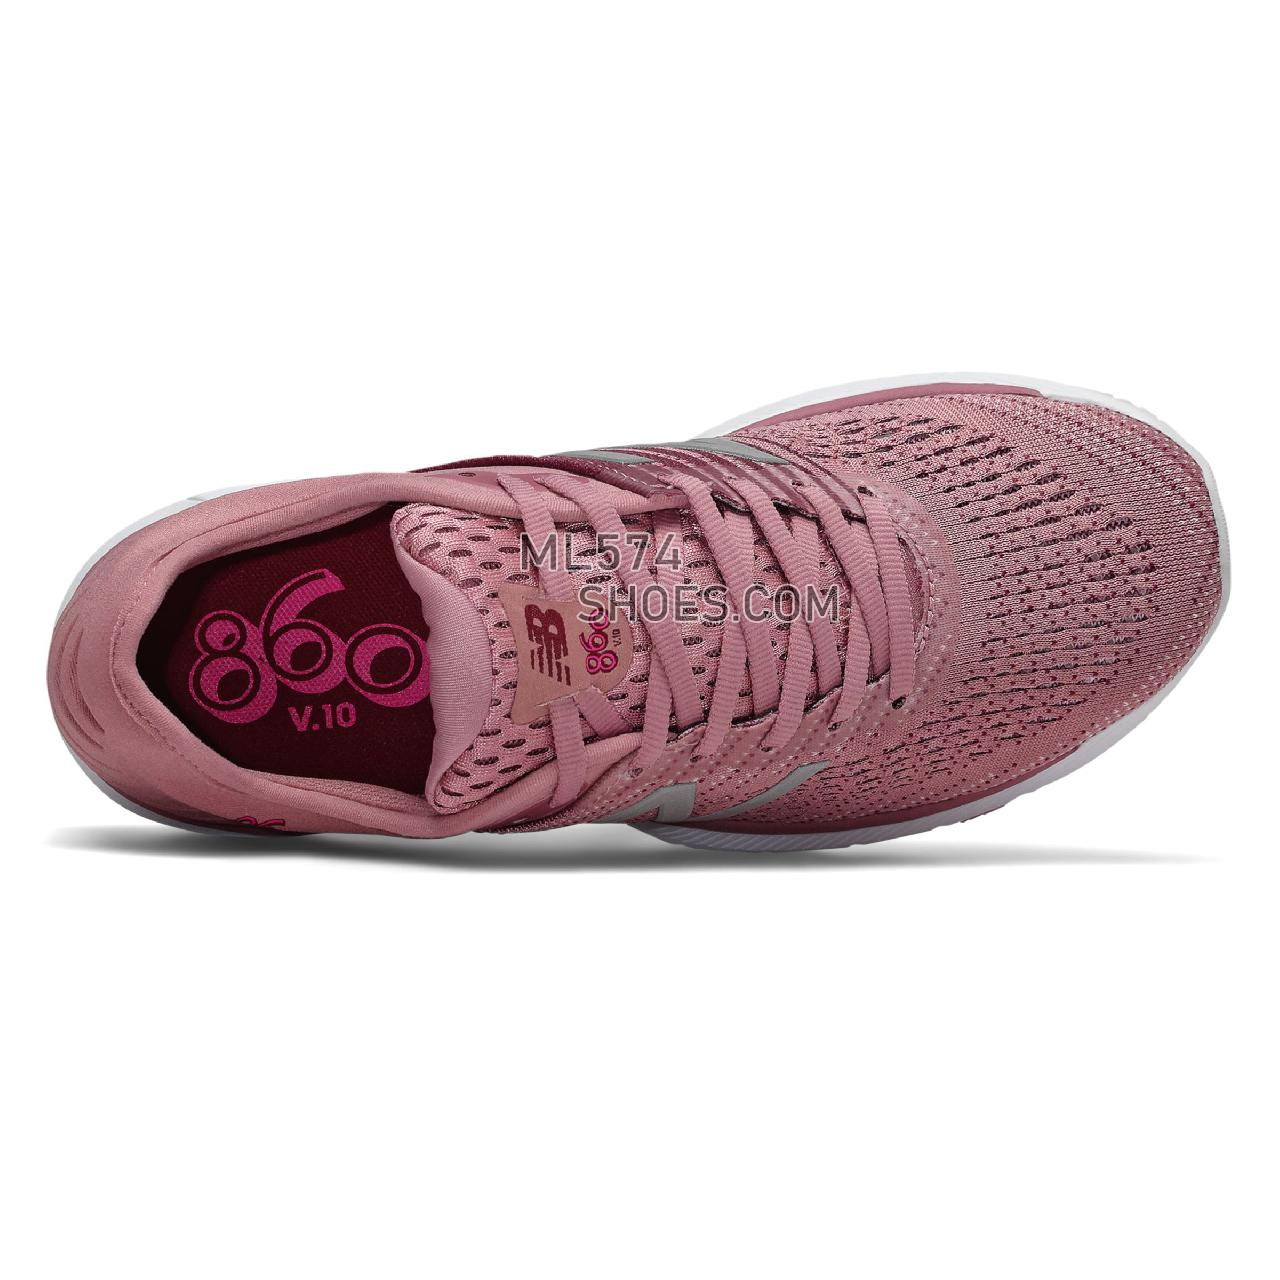 New Balance 860v10 - Women's Stability Running - Twilight Rose with Oxygen Pink and Peony - W860A10